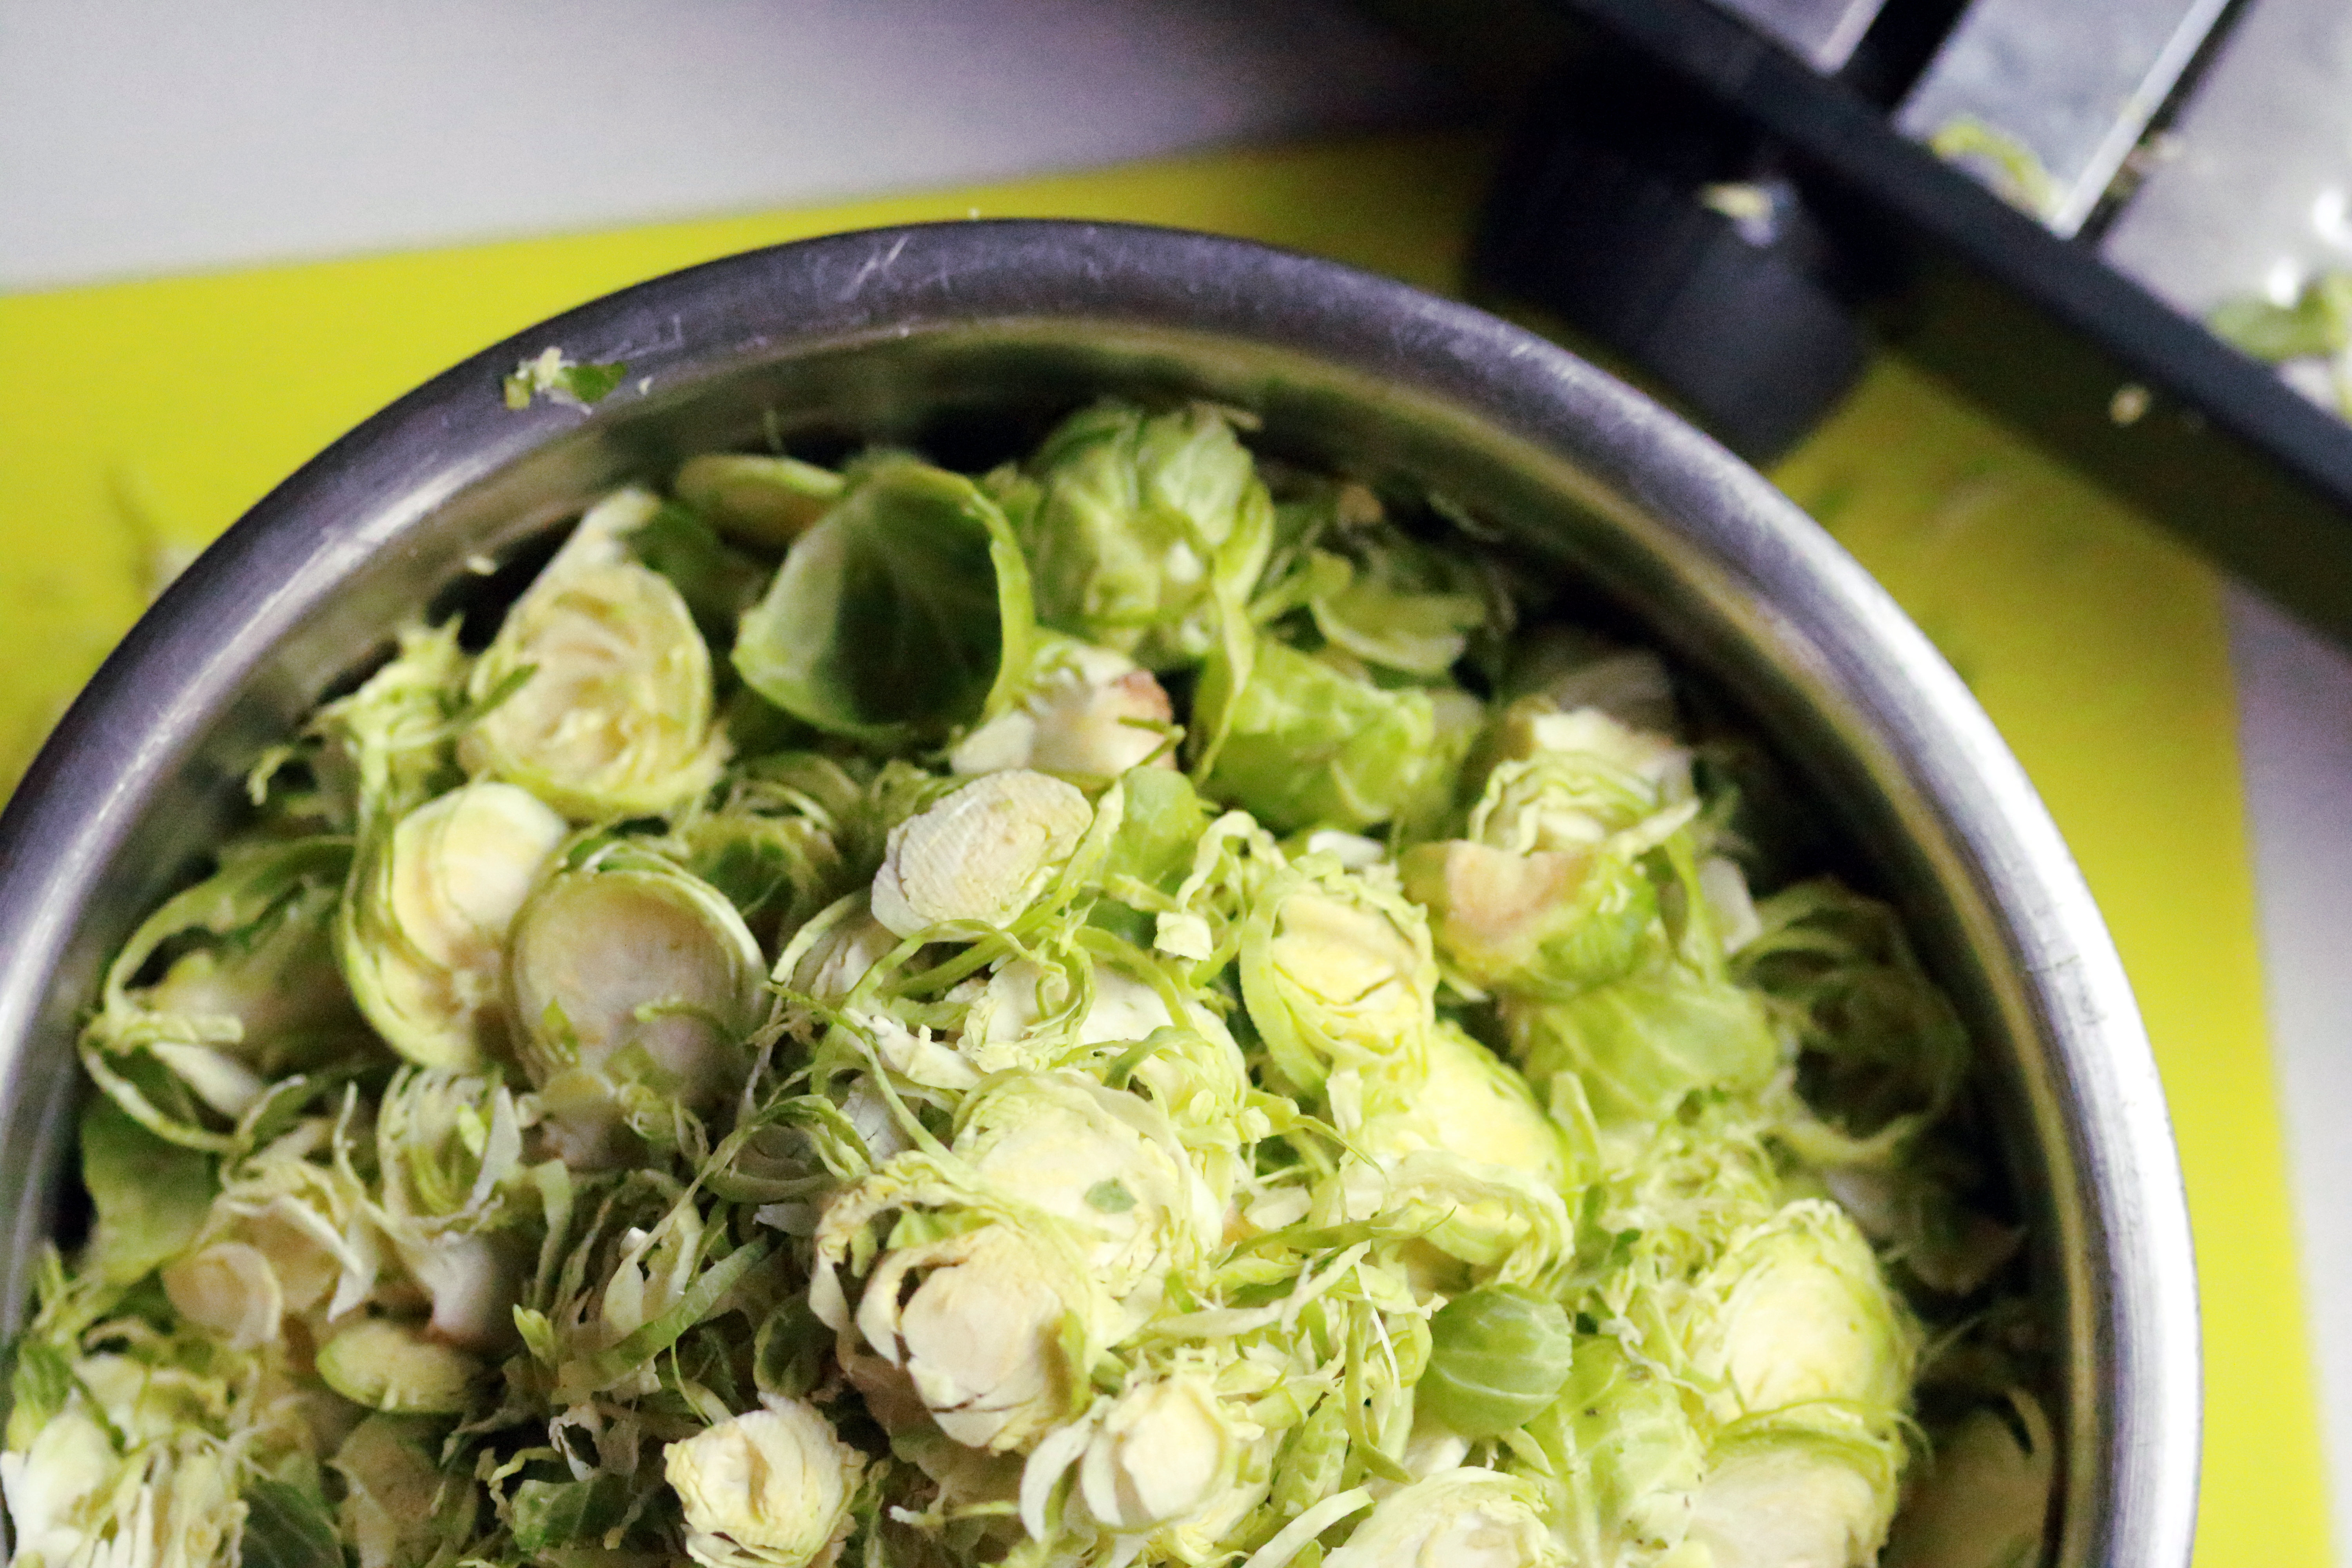 shredded brussel sprouts2